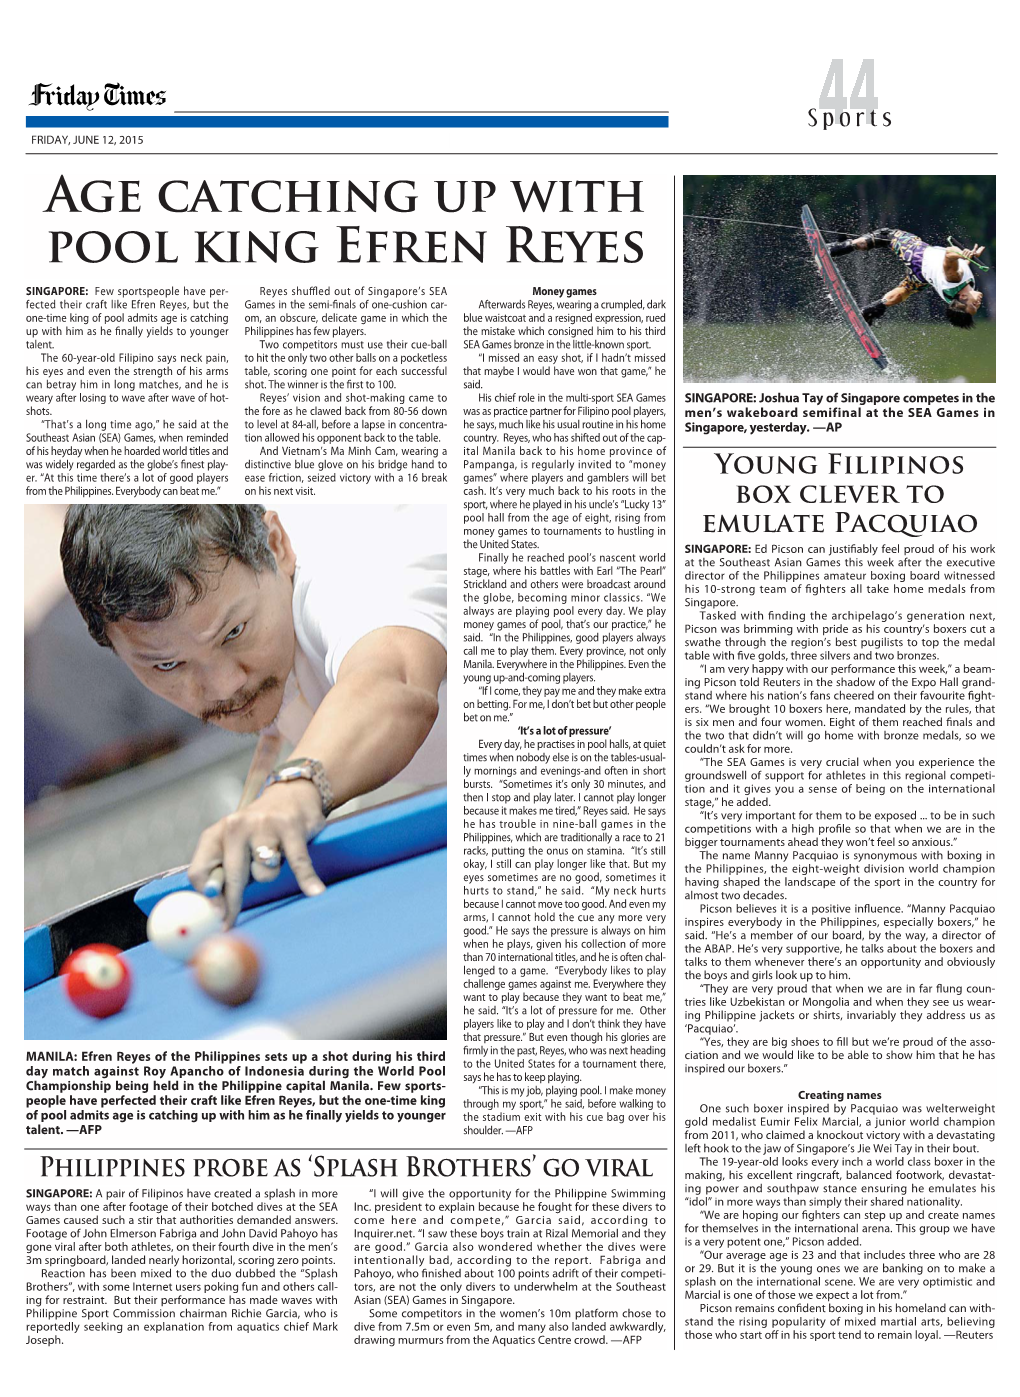 Age Catching up with Pool King Efren Reyes